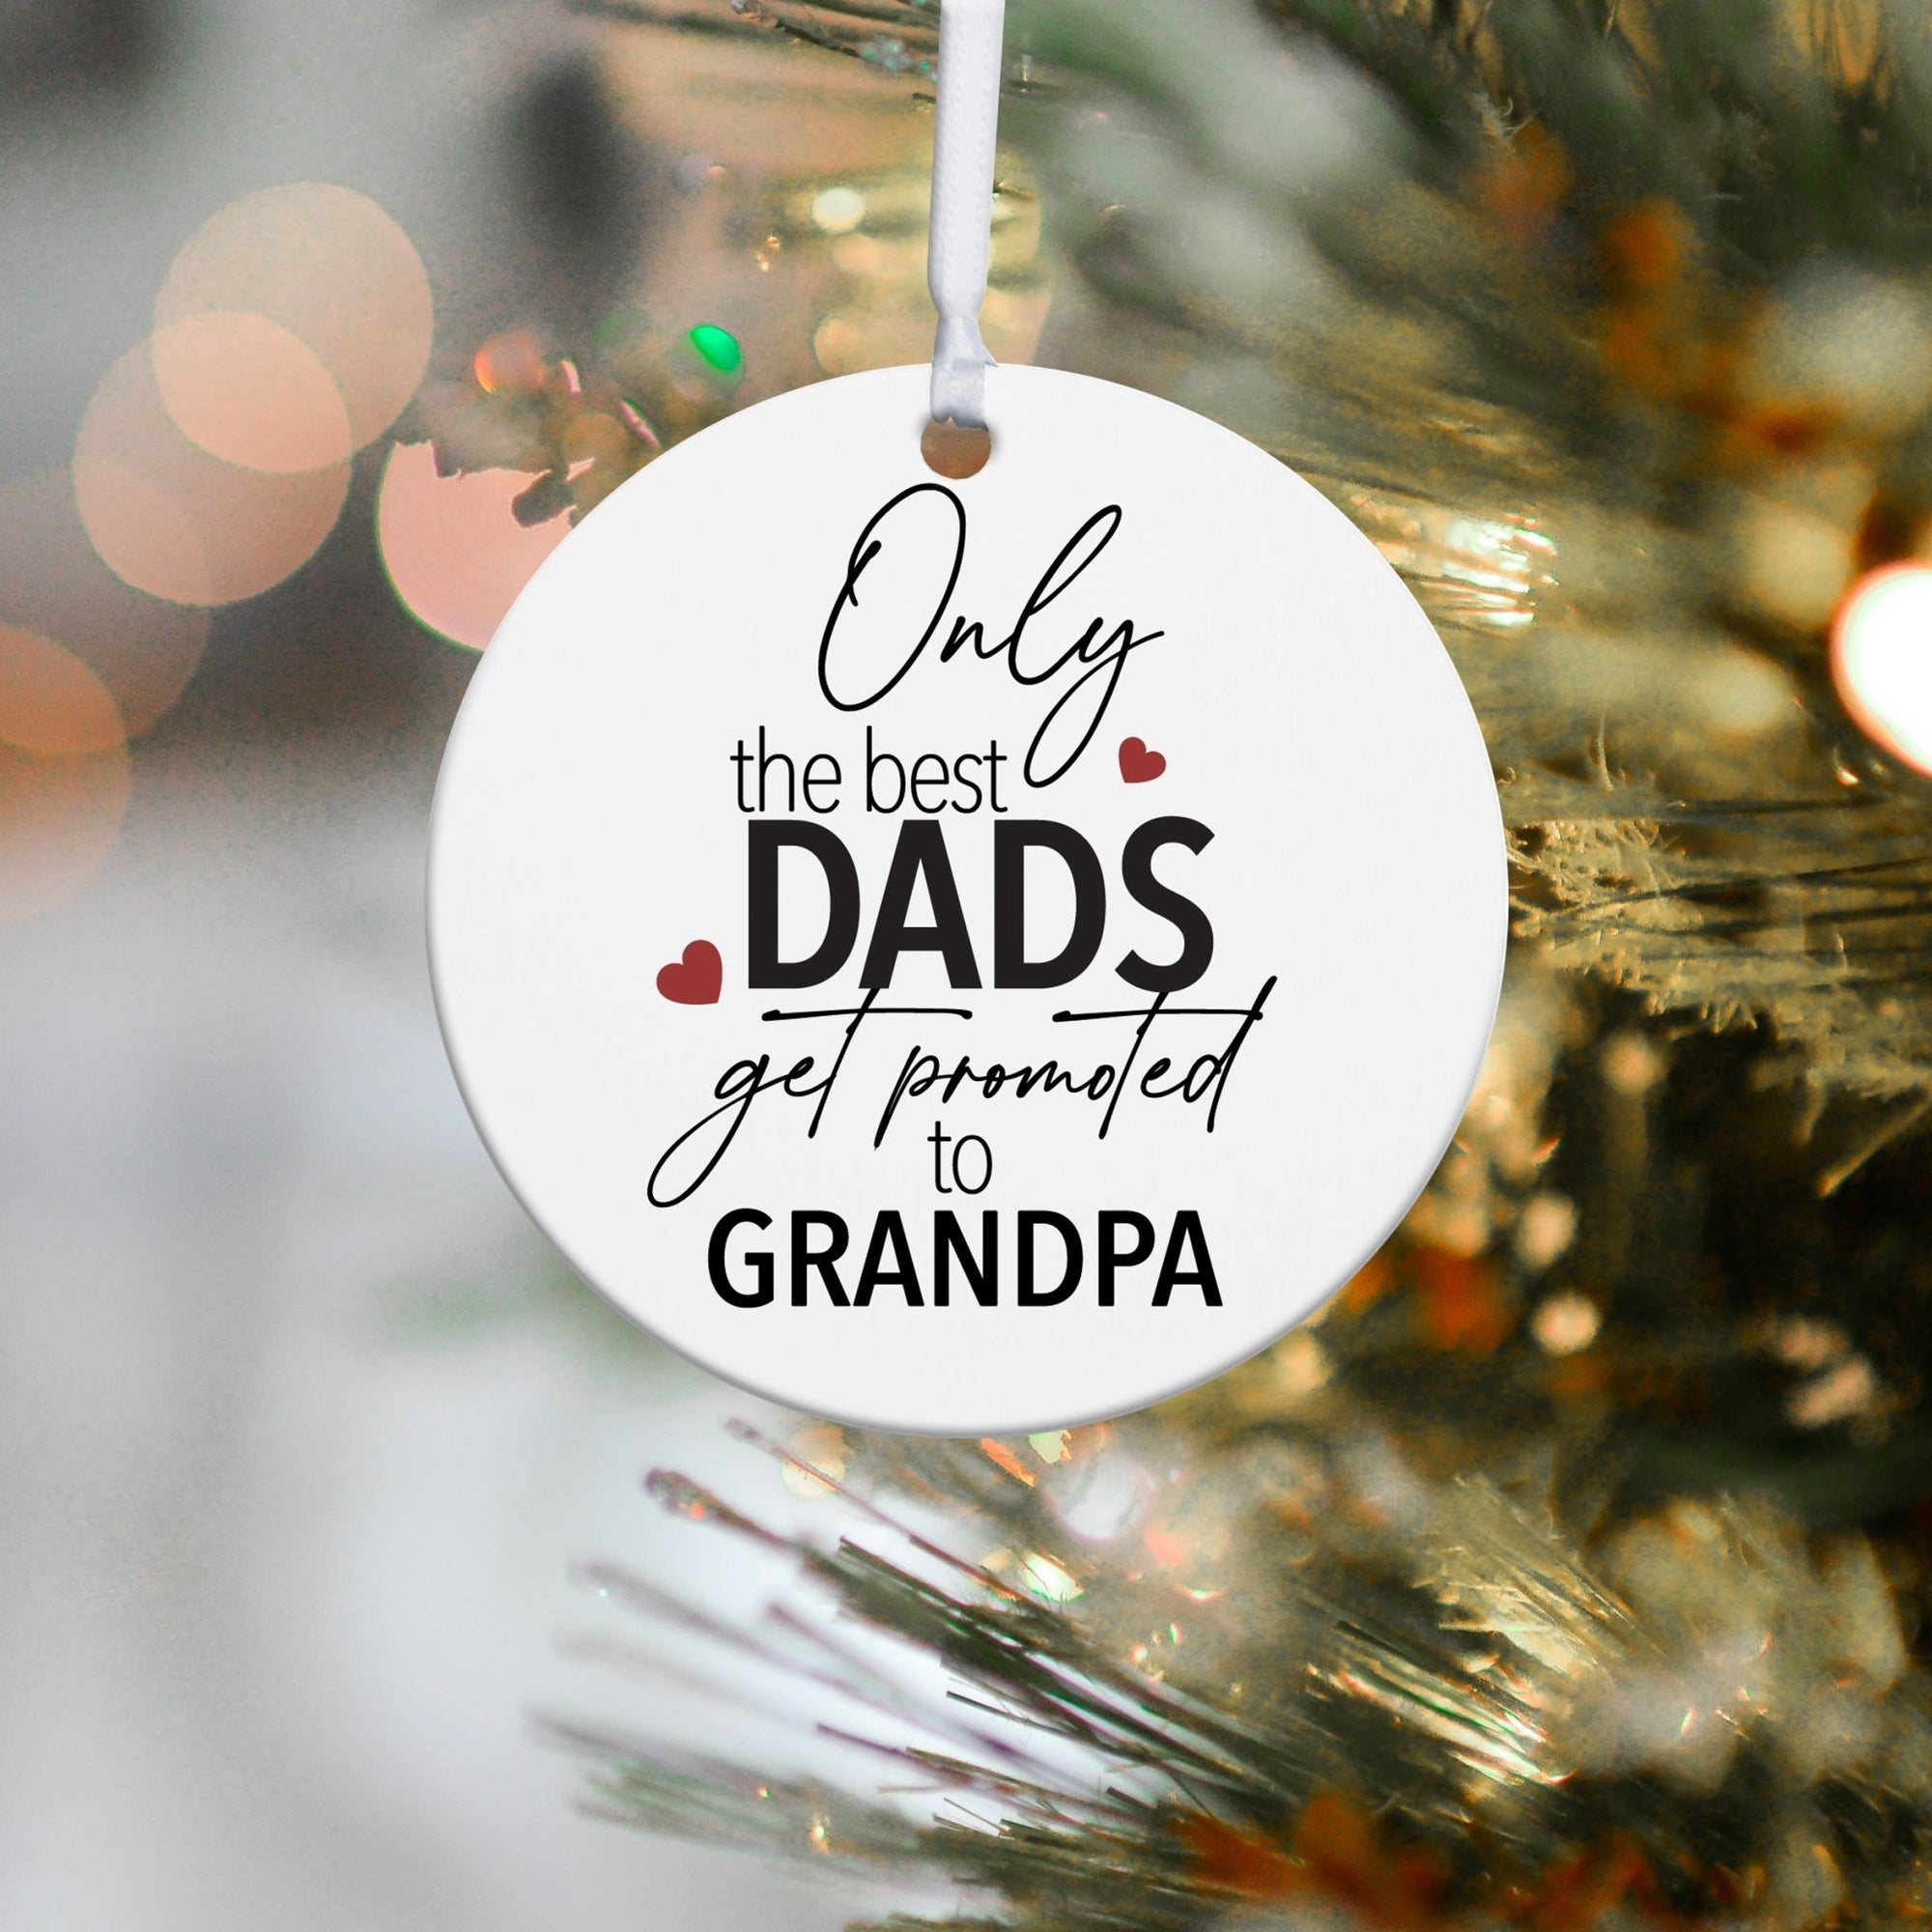 Grandparents White Ornament With Inspirational Message Gift Ideas - Only The Best Dads Get Promoted To Grandpa - LifeSong Milestones